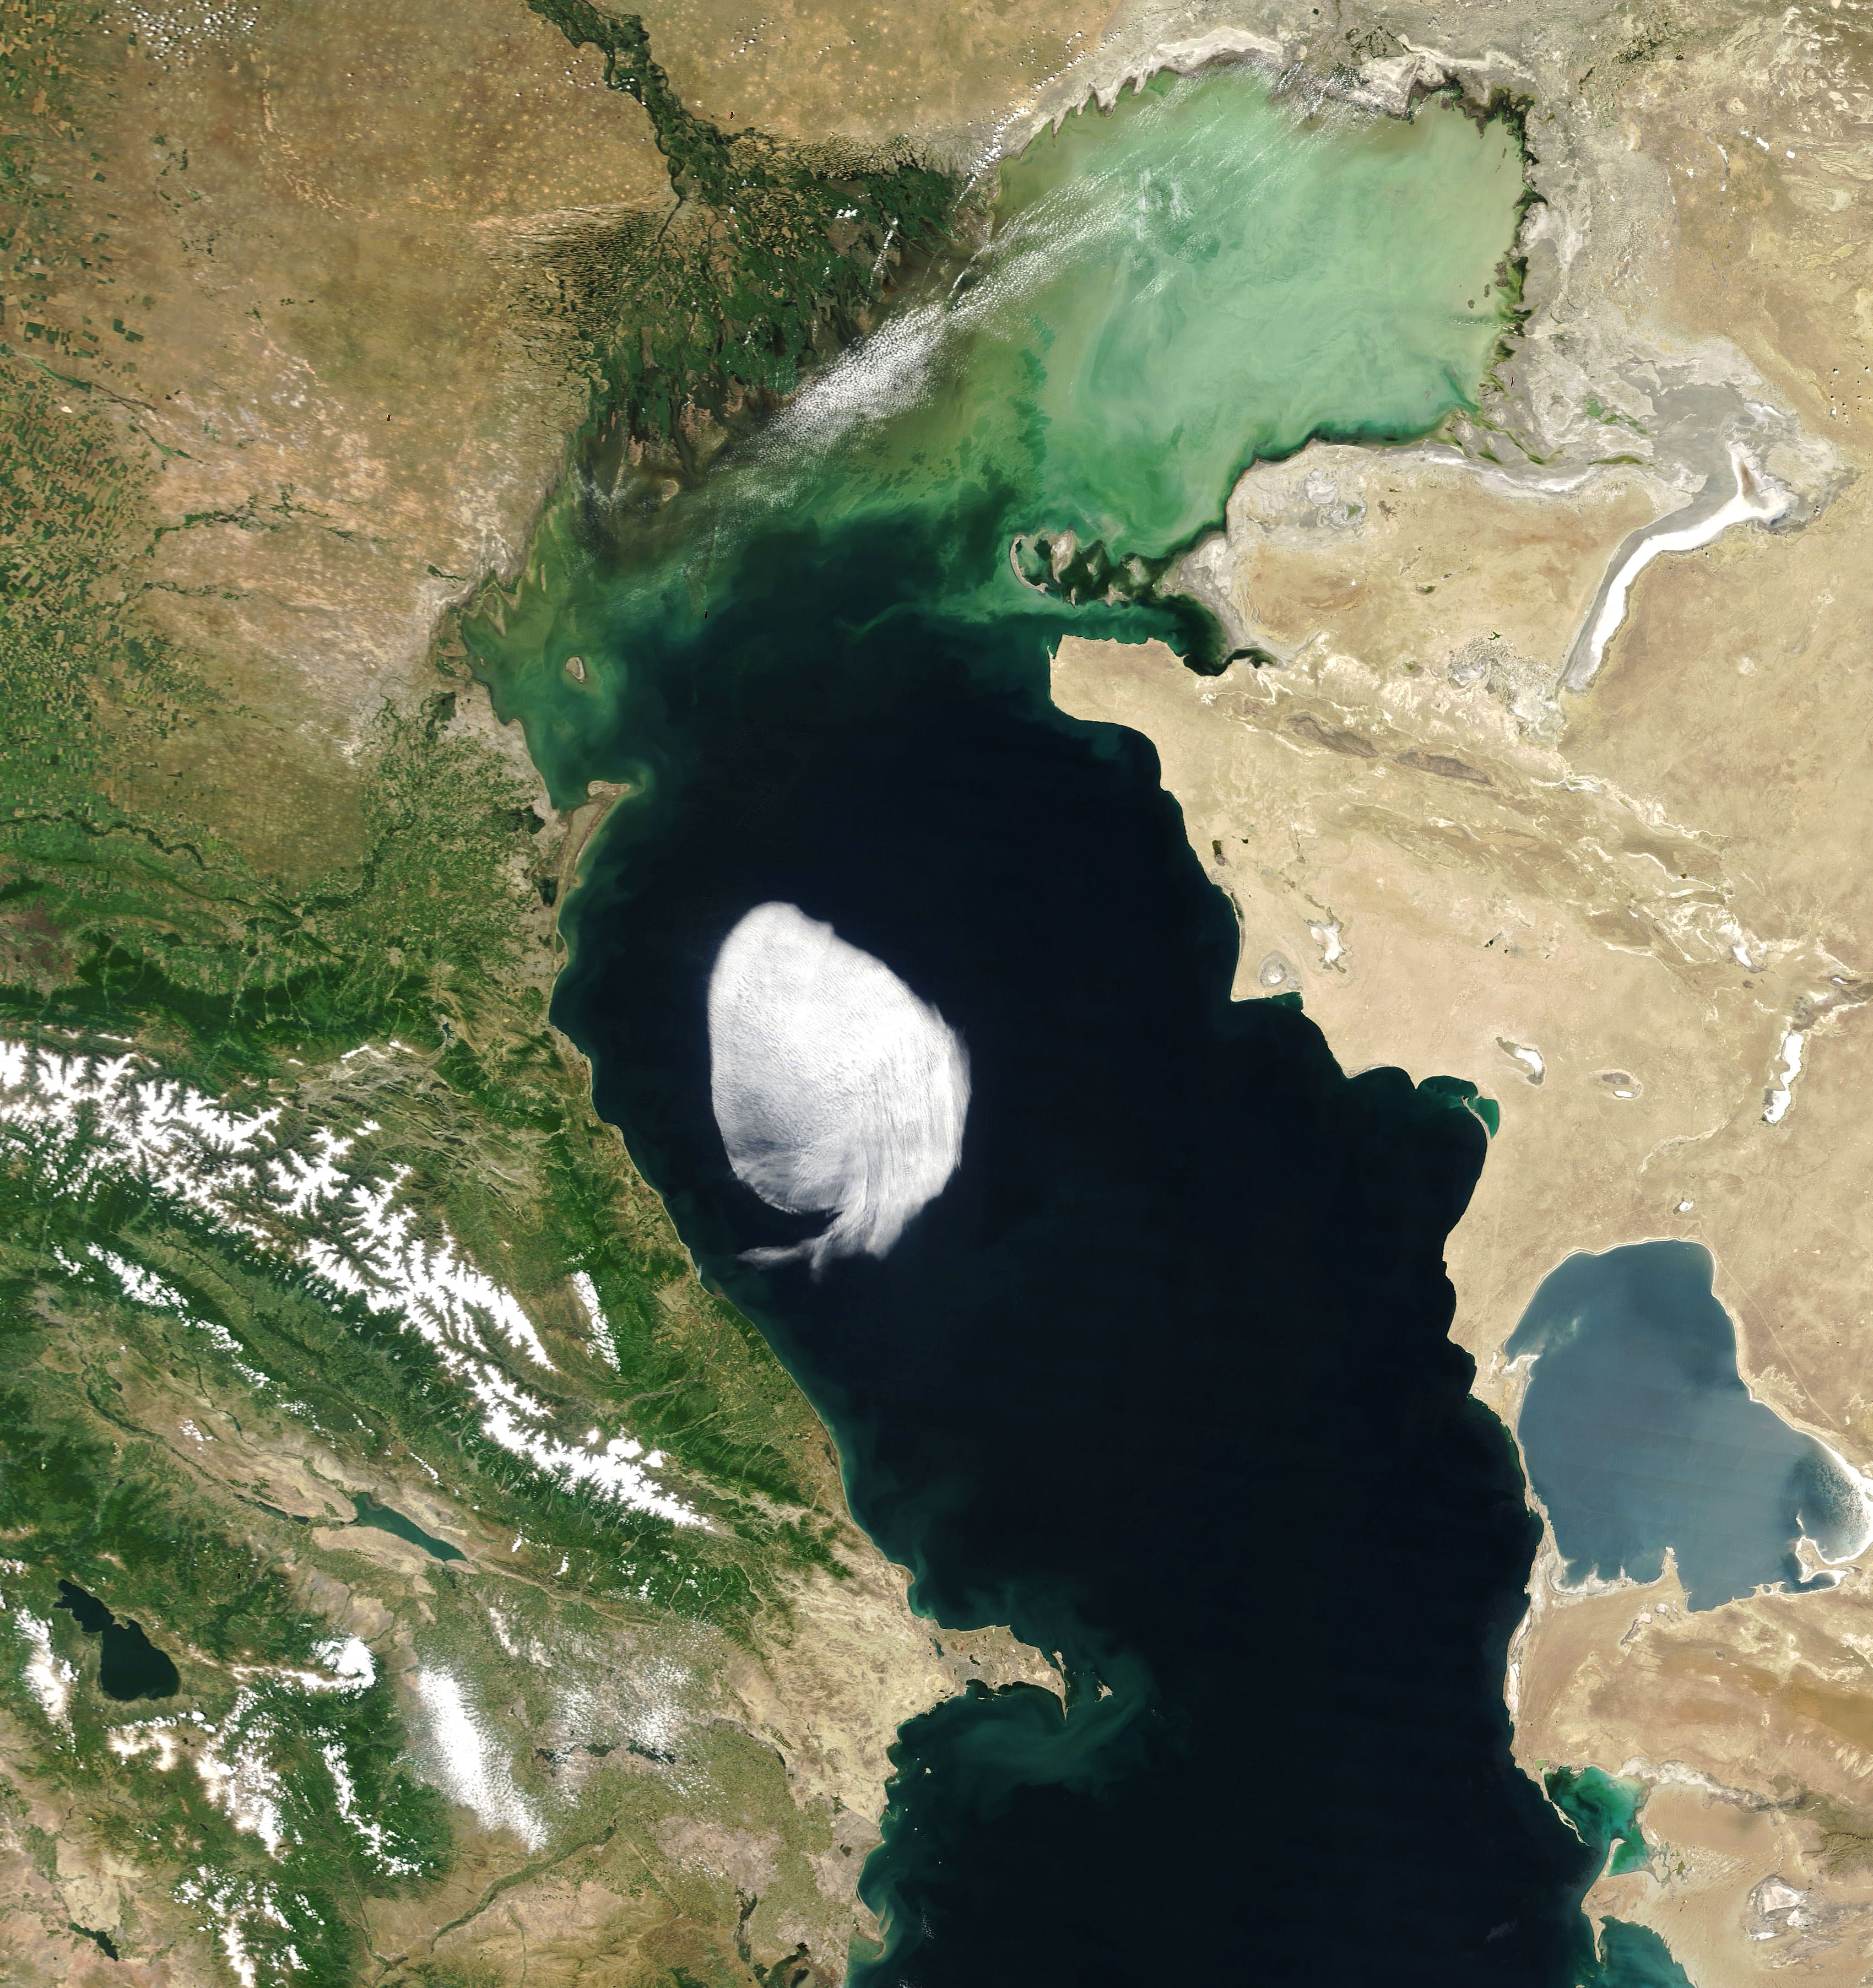 NASA satellite sees strange cloud drifting over Caspian: What makes it look more peculiar than most?